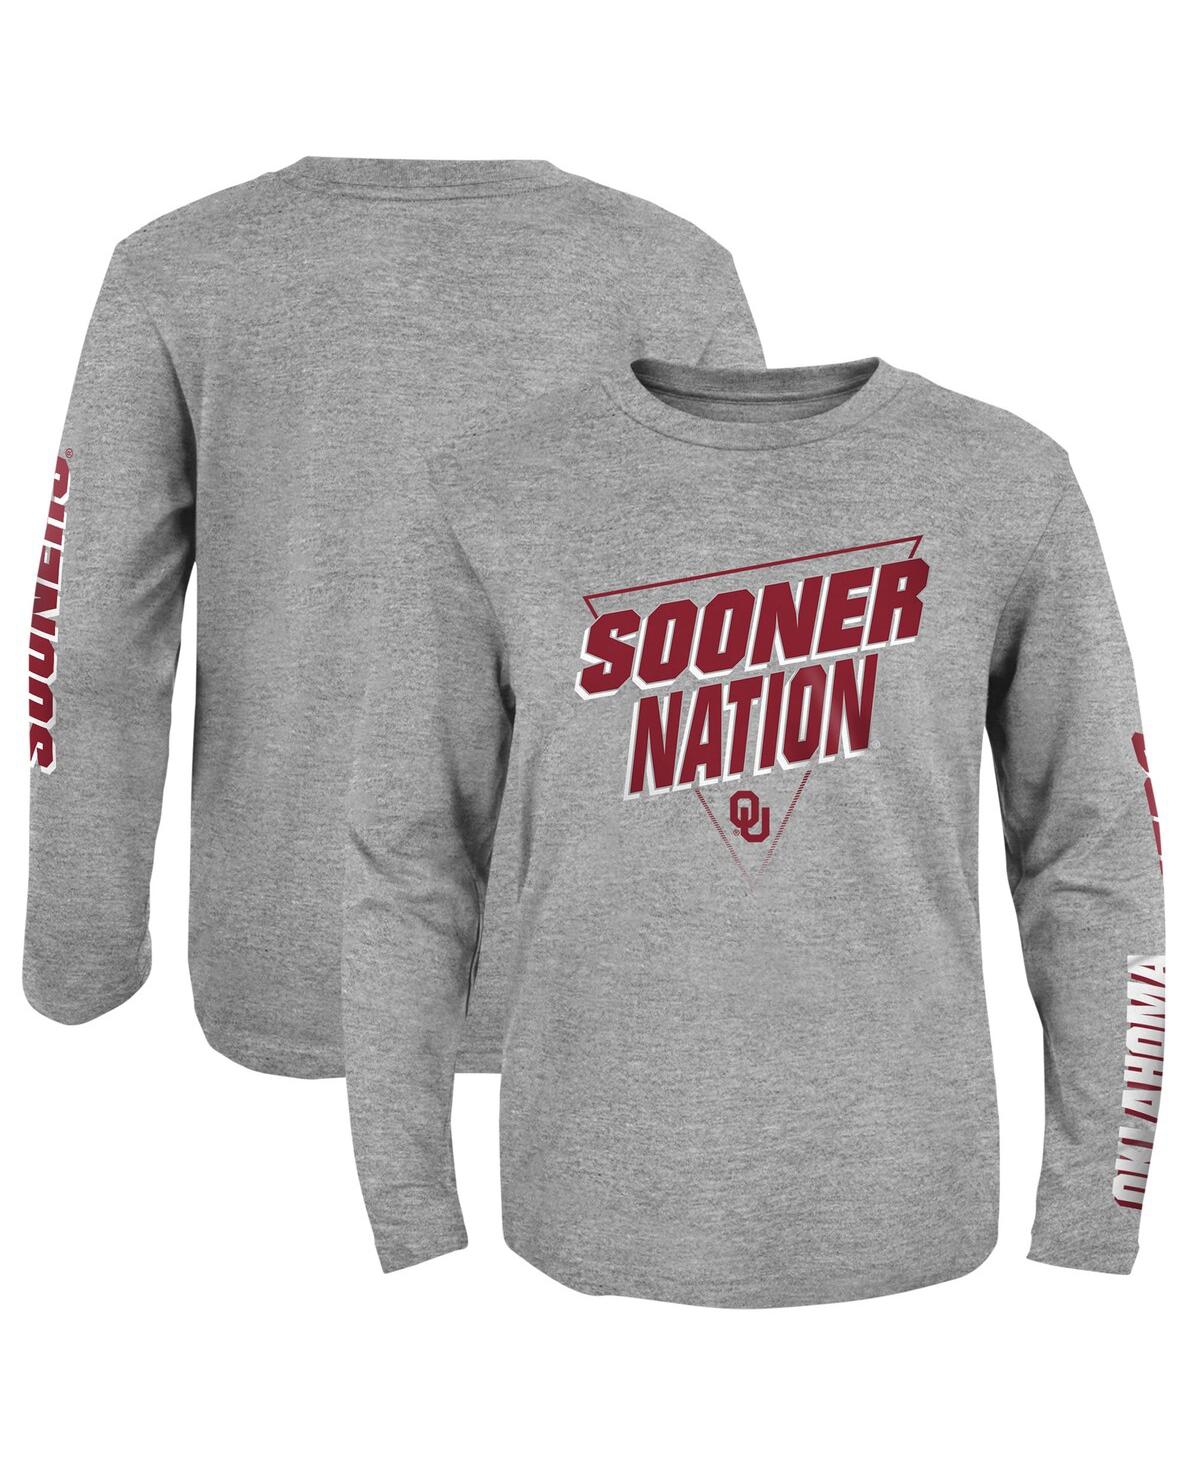 Outerstuff Kids' Big Boys Heather Gray Oklahoma Sooners 2-hit For My Team Long Sleeve T-shirt